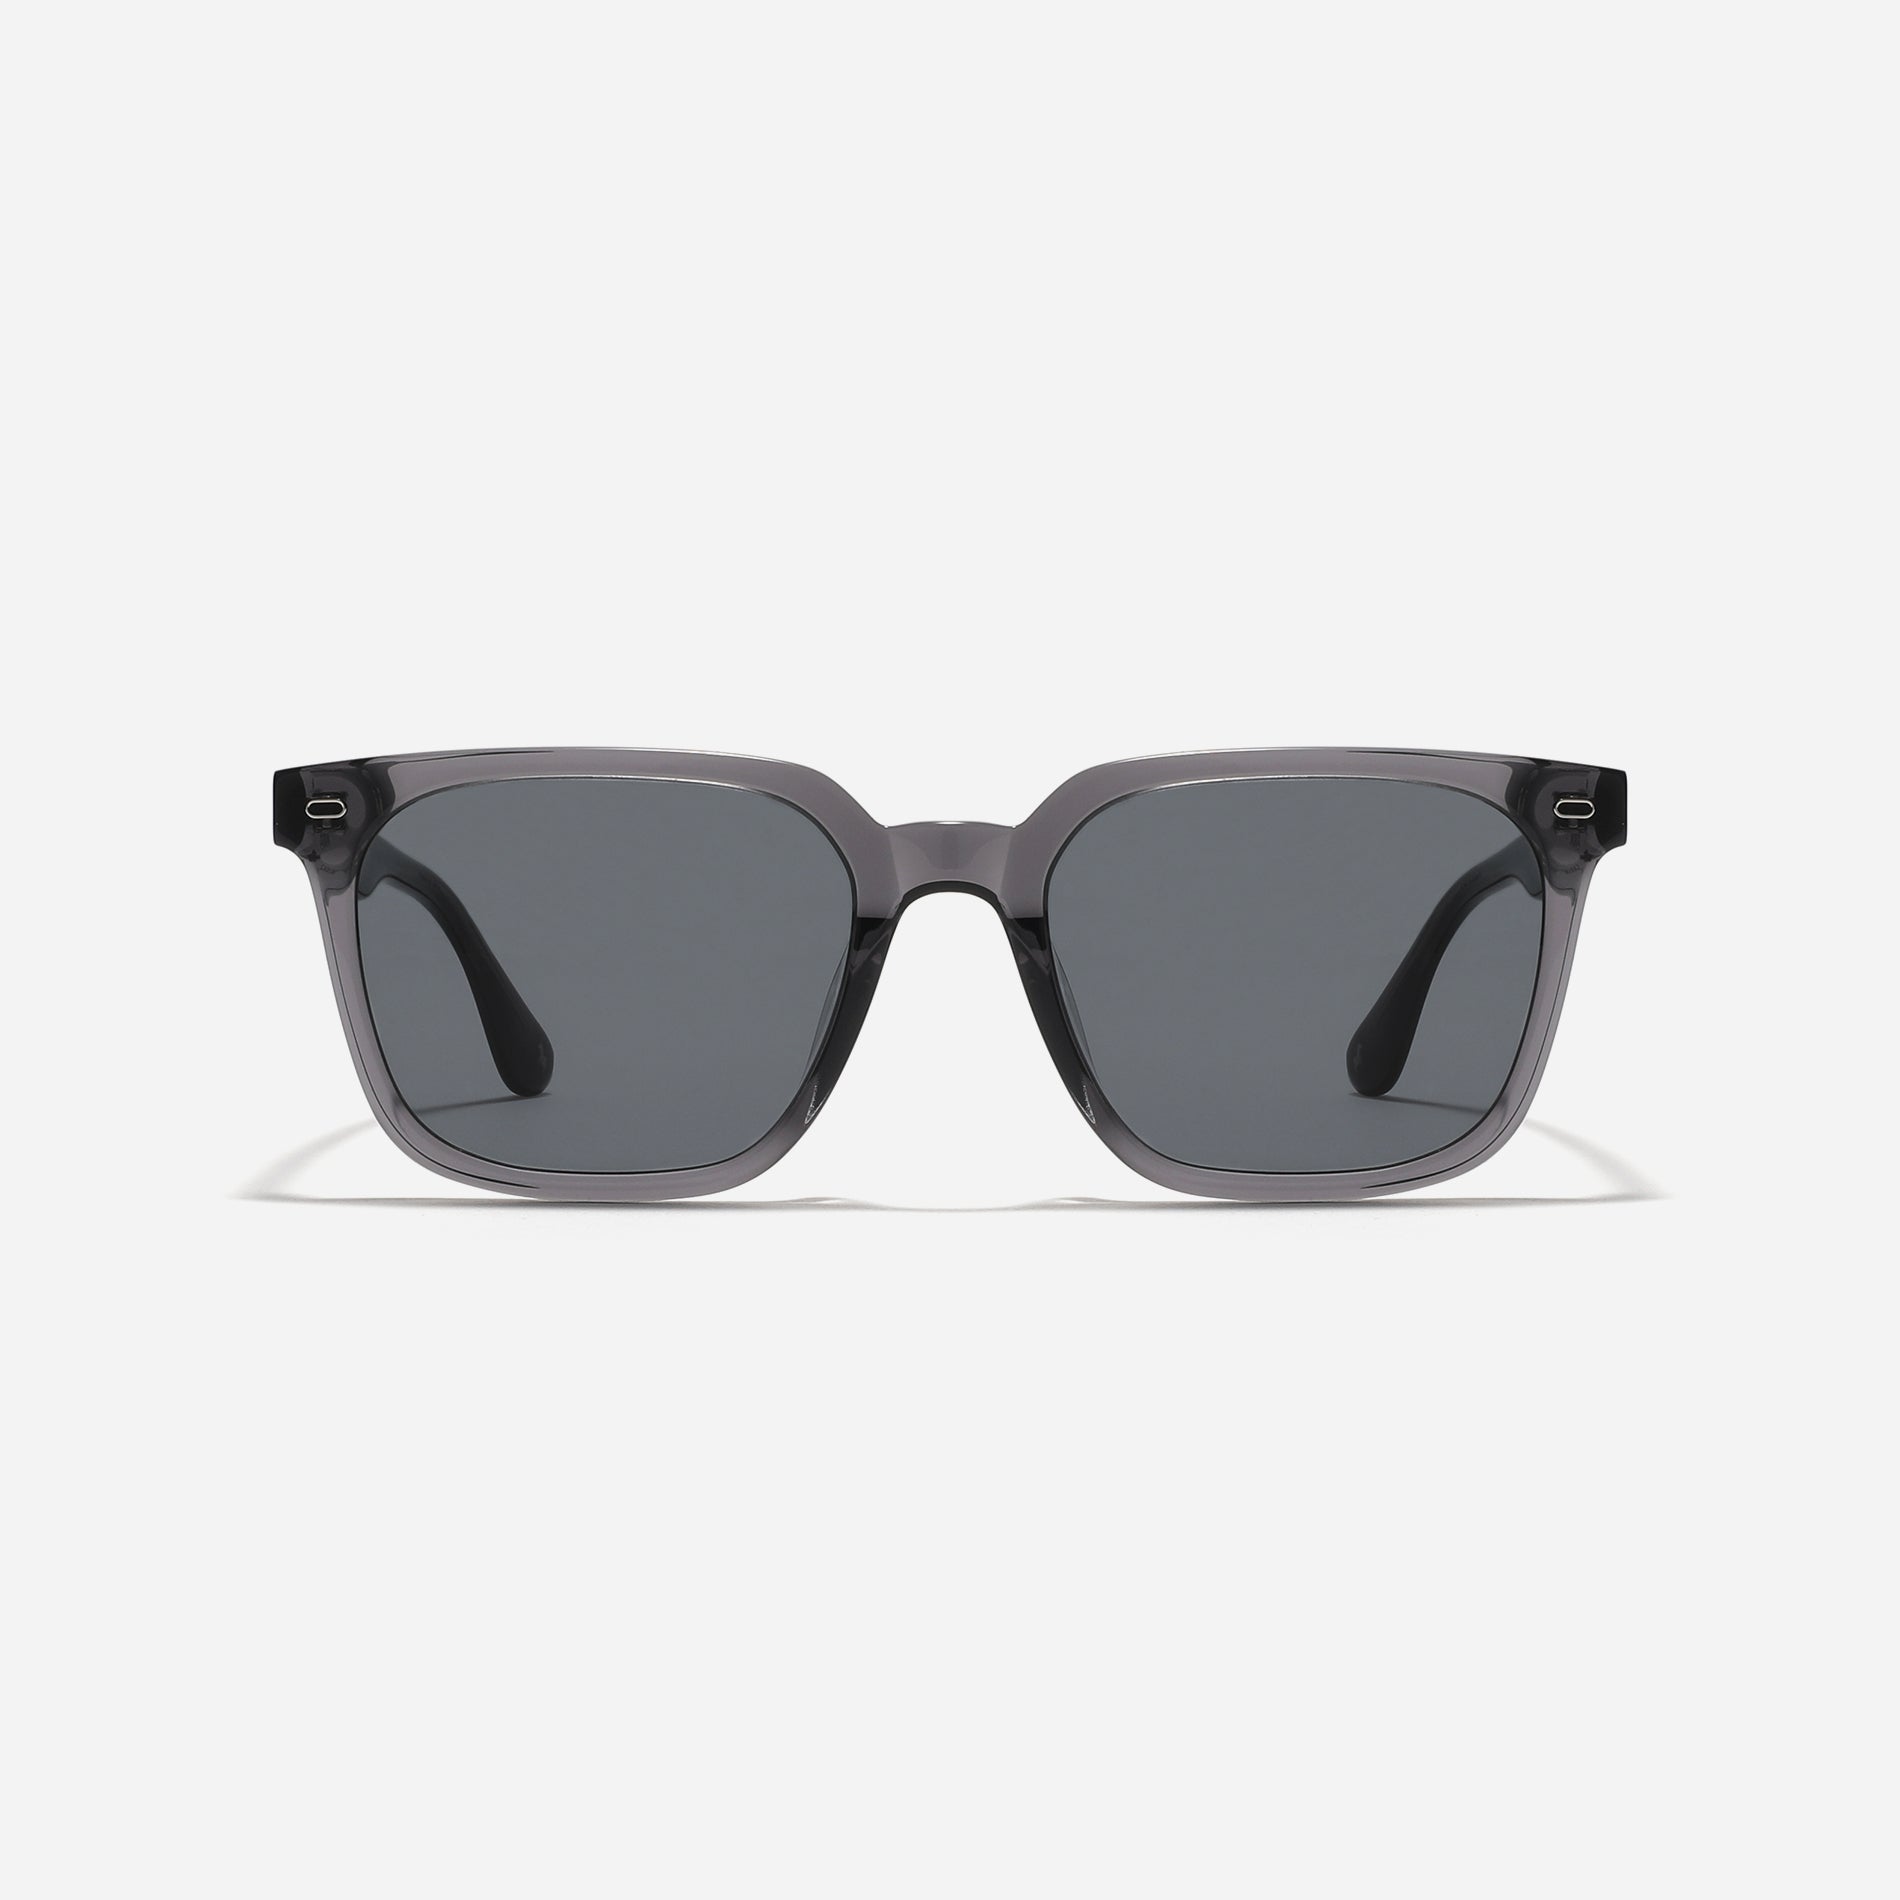 Oversized square-shaped sunglasses from the Forest Line. Their frame offers a chic style suitable for daily wear, especially appealing to those new to sunglasses.